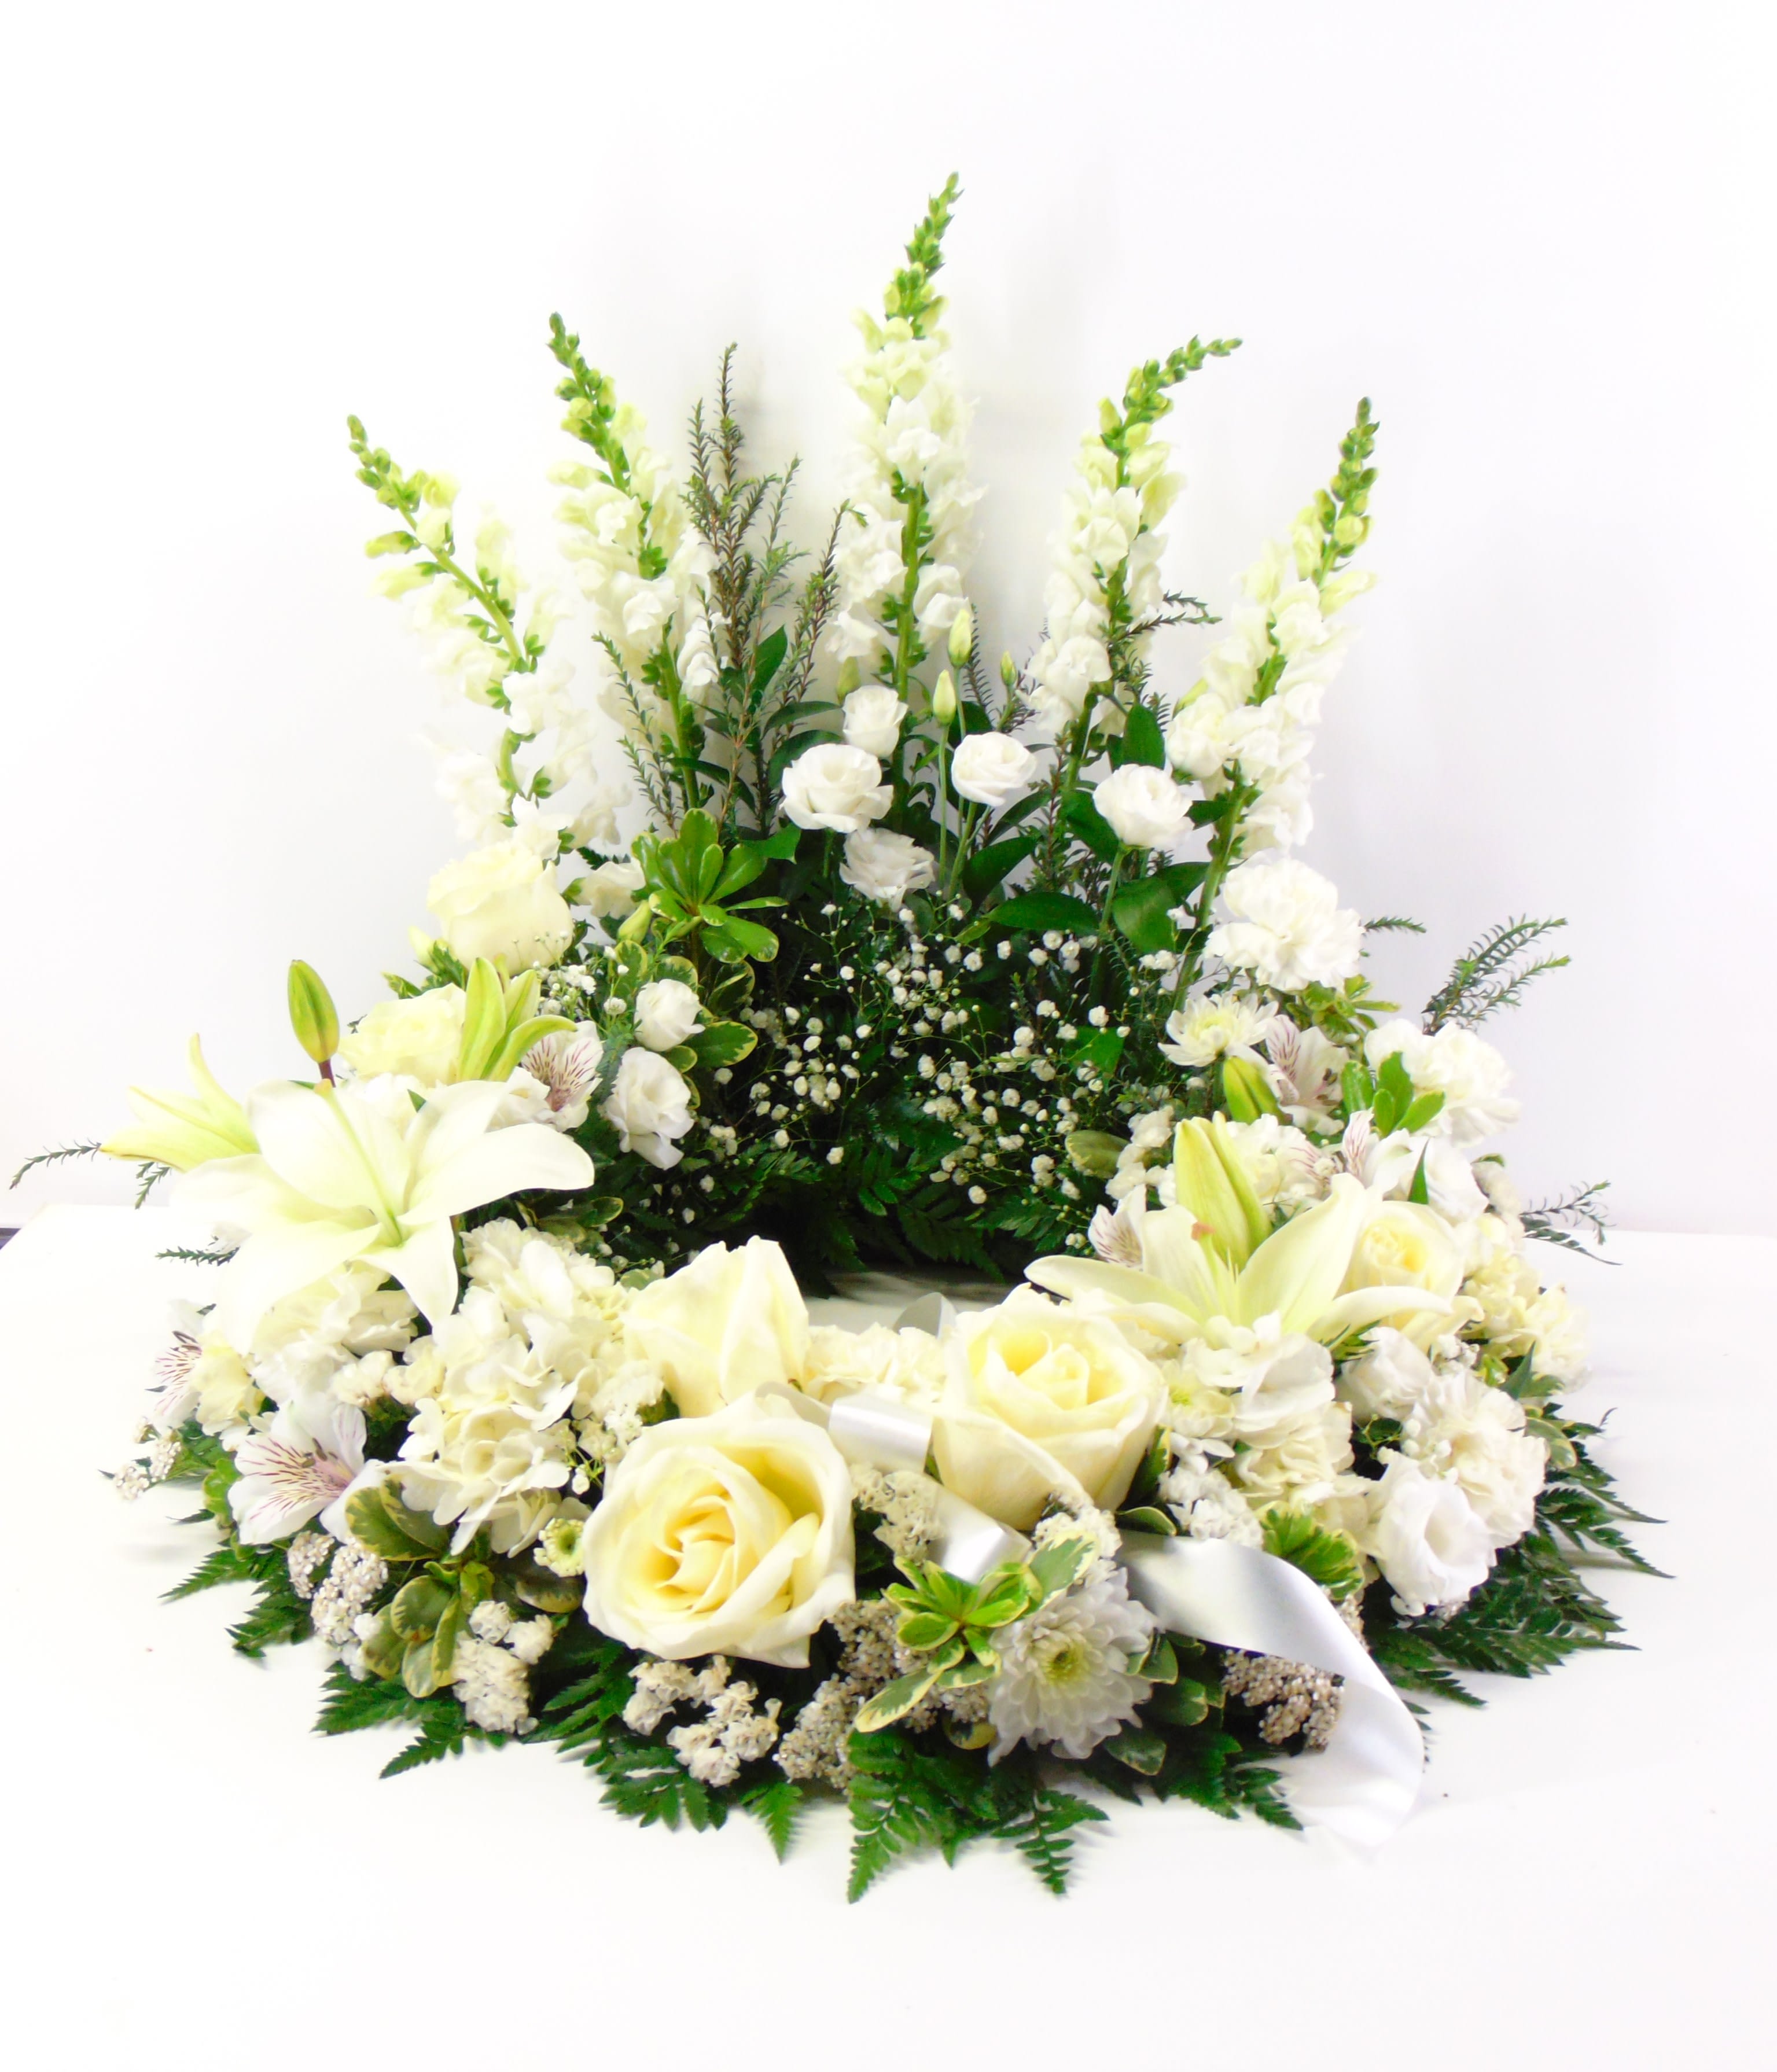 Heaven Scent Cremation Wreath - A Heavenly white embrace of scented white roses, hydrangea, lilies, snapdragon fragrant lisianthus, carnations, alstromeria and baby's breath. Standard option is pictured. The deluxe and premium option will feature more snapdragons coming down the sides and more roses around the front and one more lily bloom.